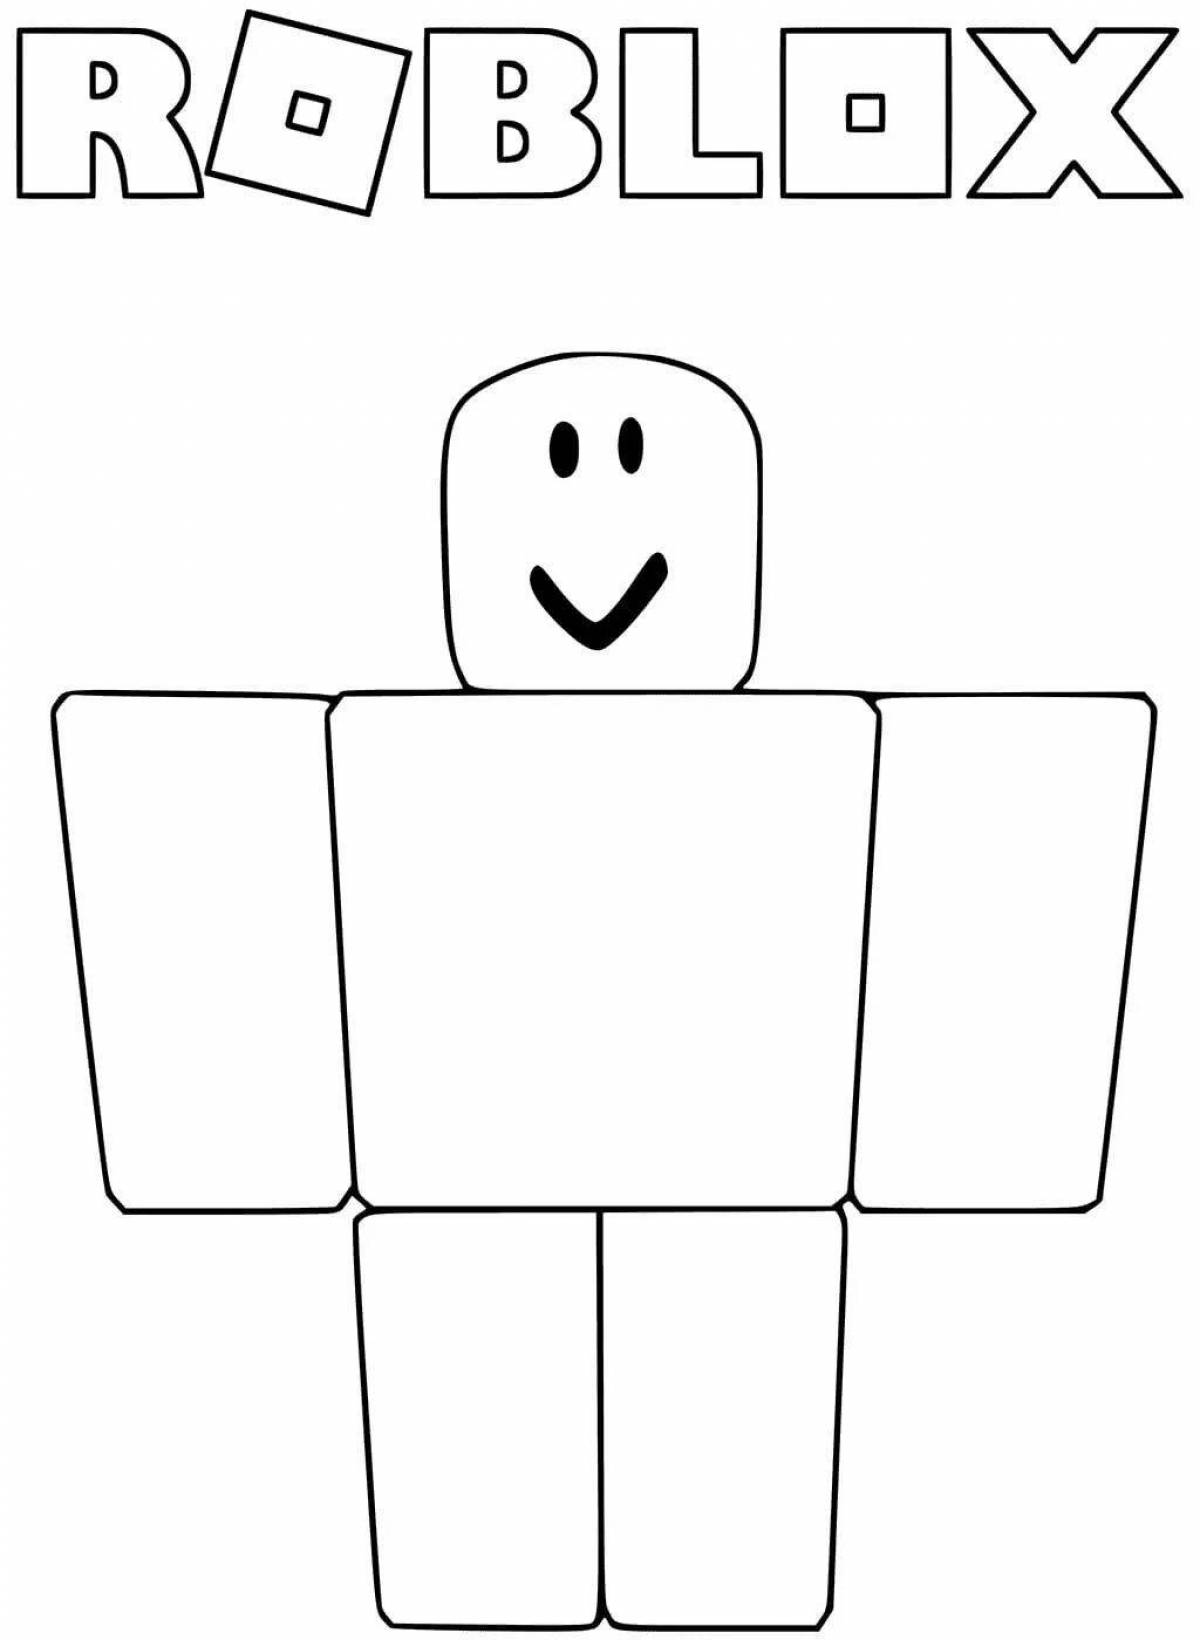 Attractive roblox face coloring page